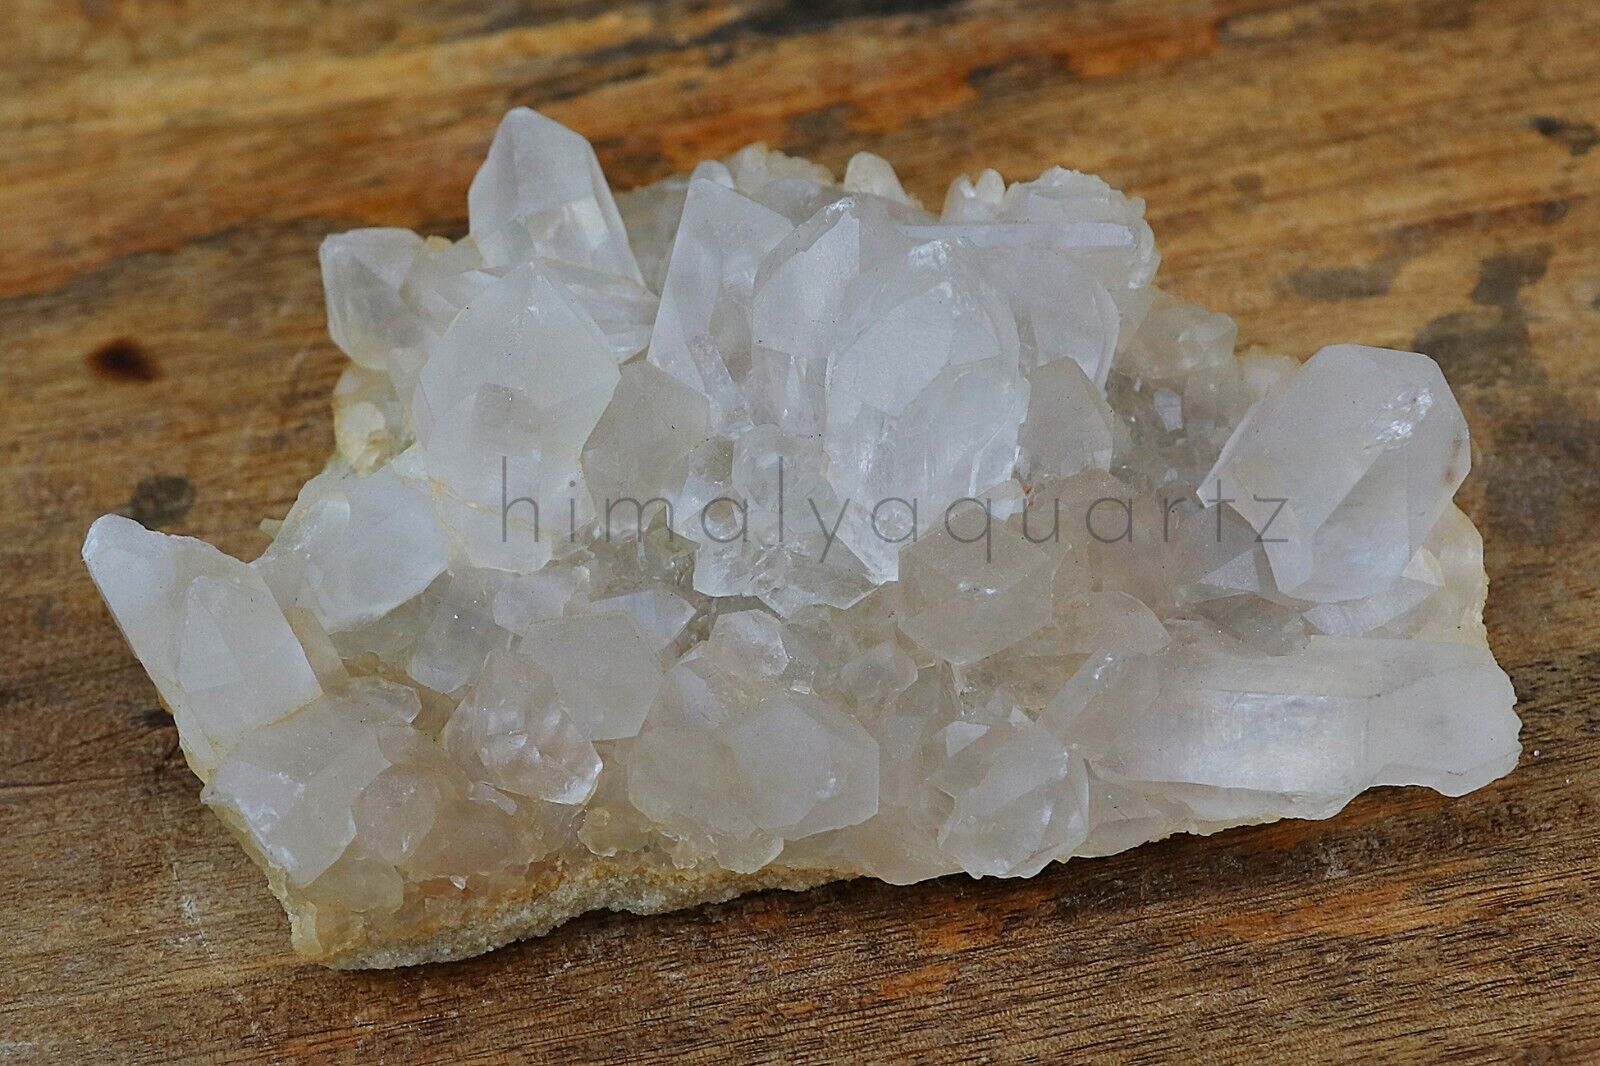 Pointed White Himalayan Samadhi Quartz with Yellow shade crystal 388 gm Specimen